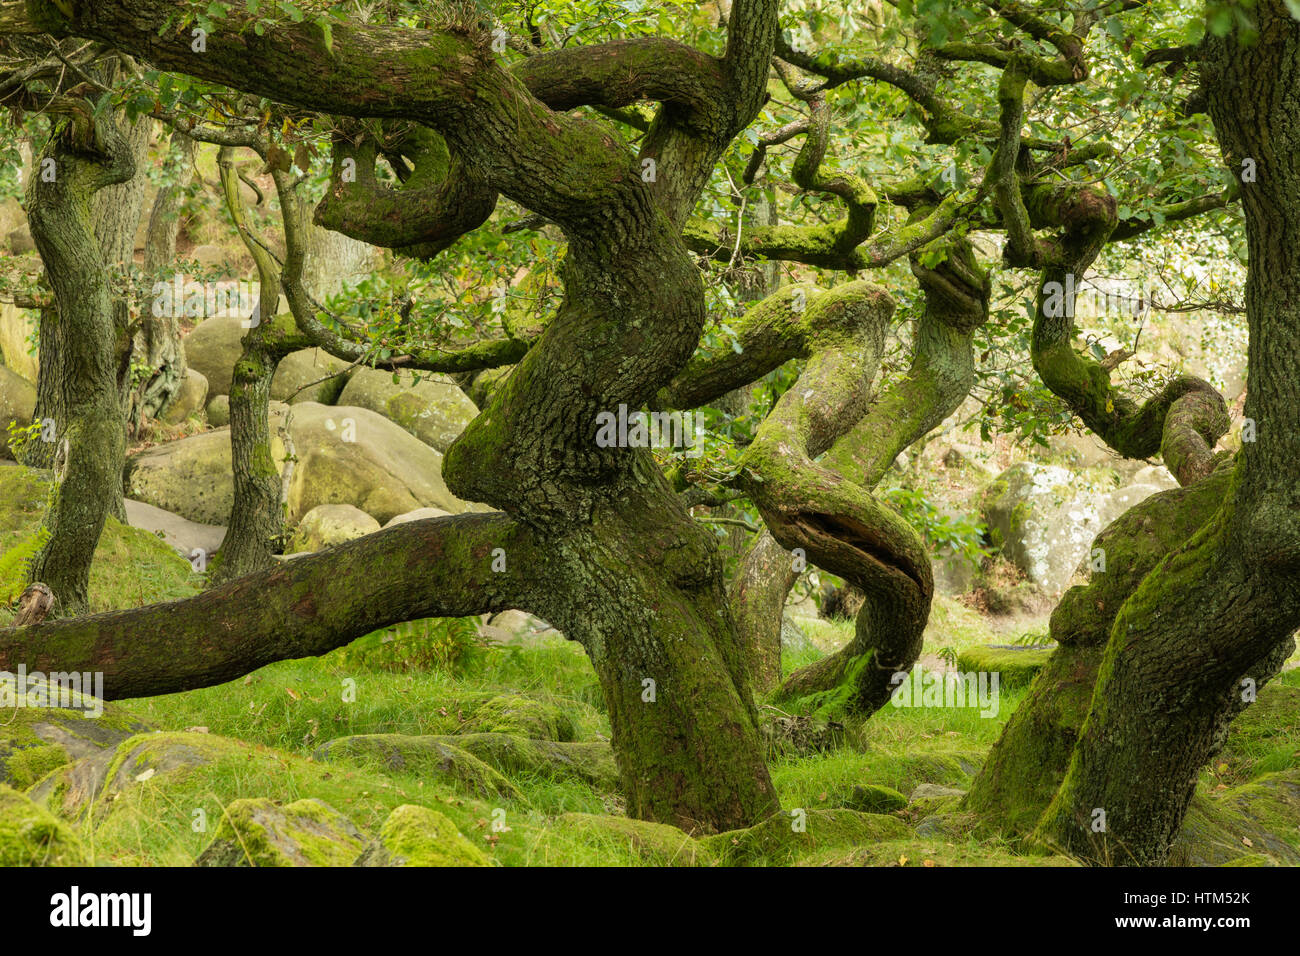 Twisted tree trunks in Padley Gorge, Derbyshire Peaks District, England, UK Stock Photo